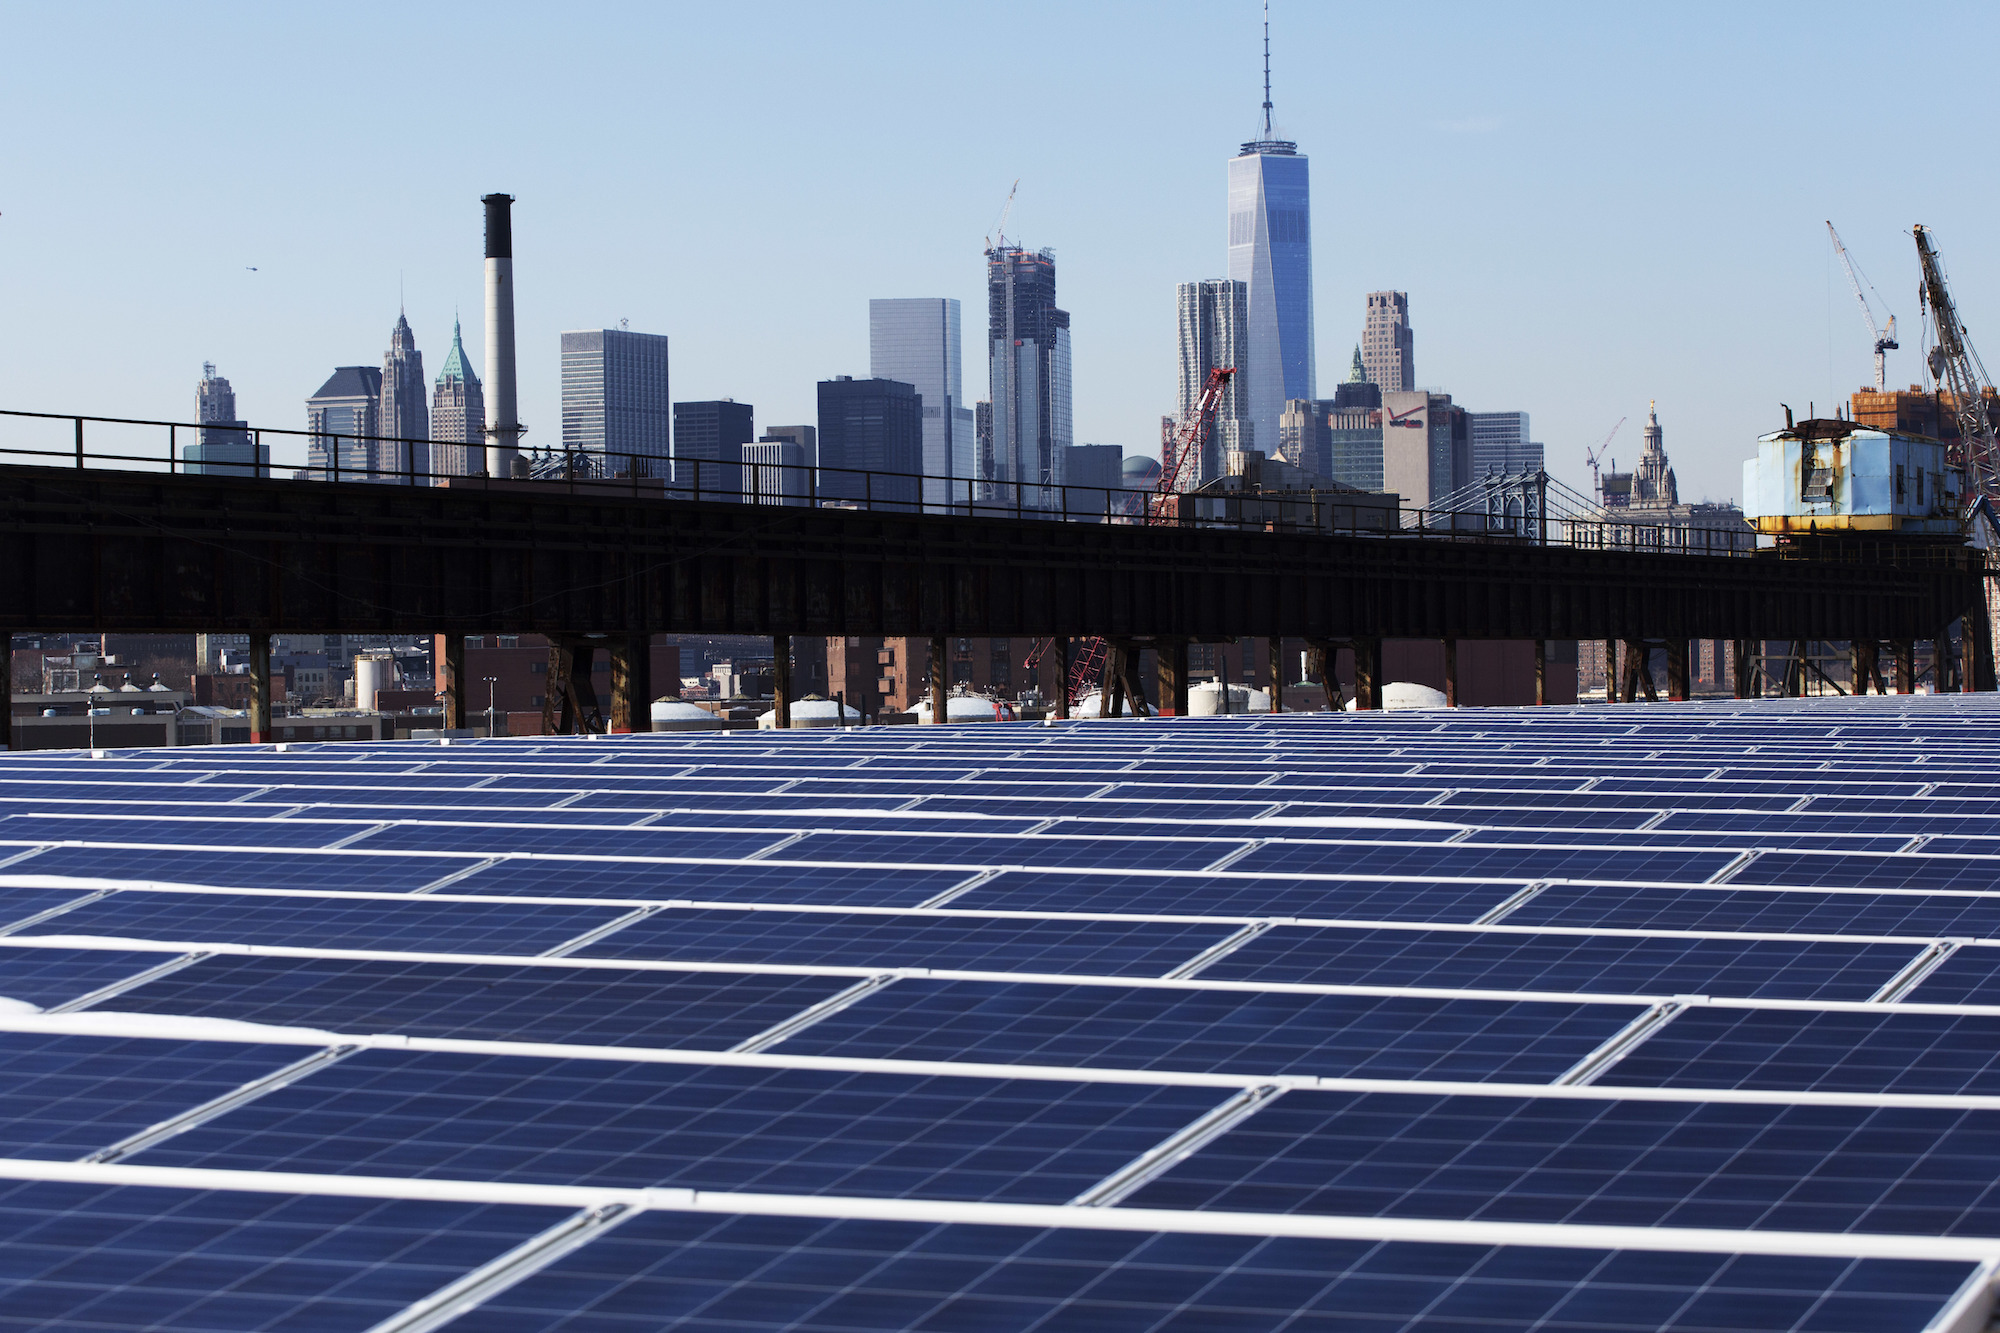 a photo of many rooftop solar panels along the bottom of the image. Above, you can see the Manhattan skyline with man tall skyscrapers.